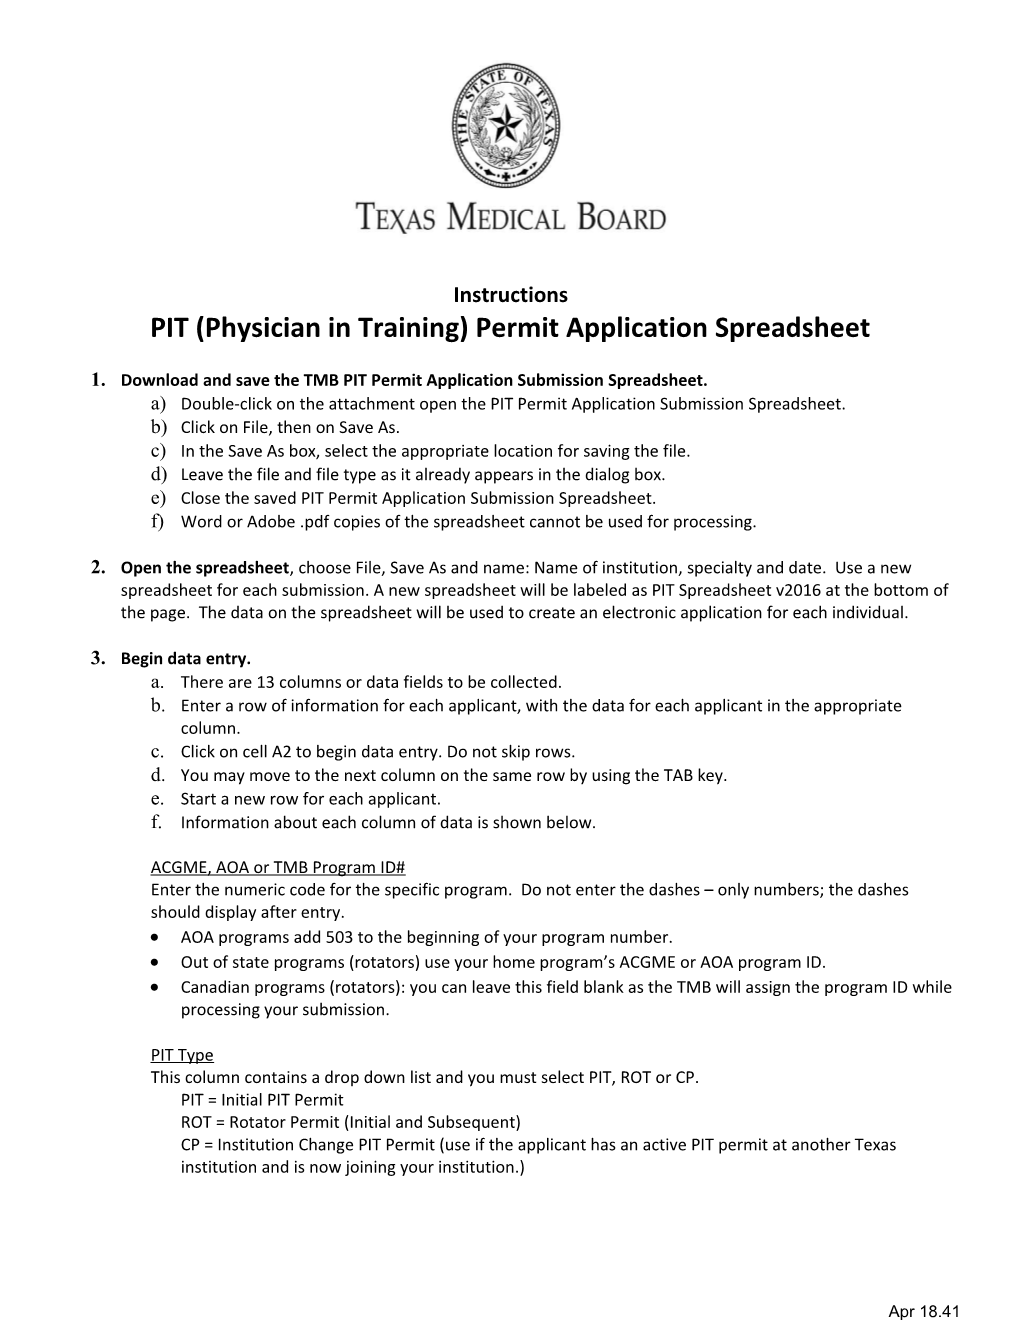 PIT (Physician in Training) Permit Application Spreadsheet